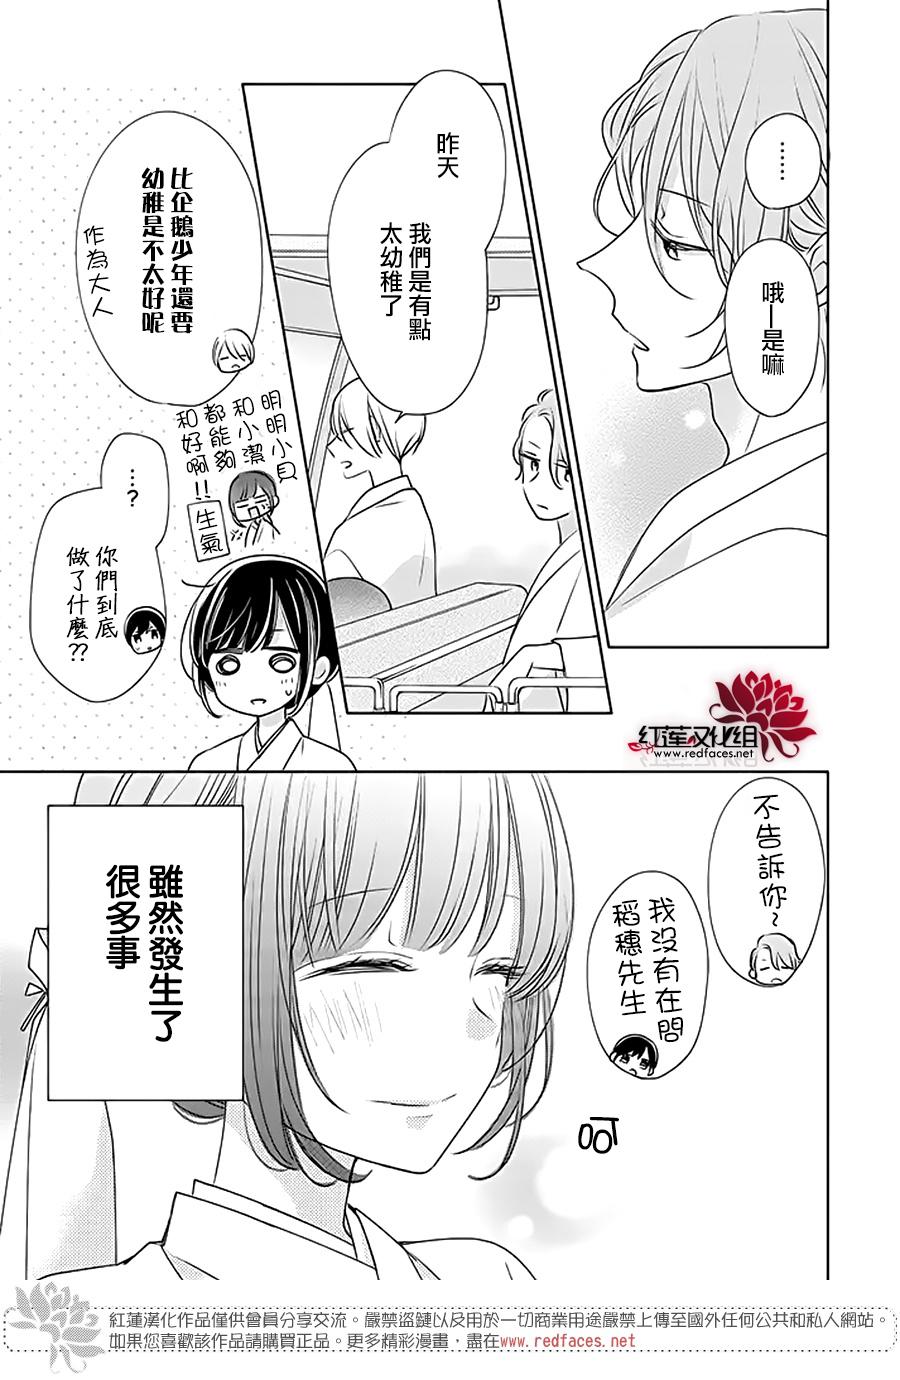 If given a second chance - 28話 - 2